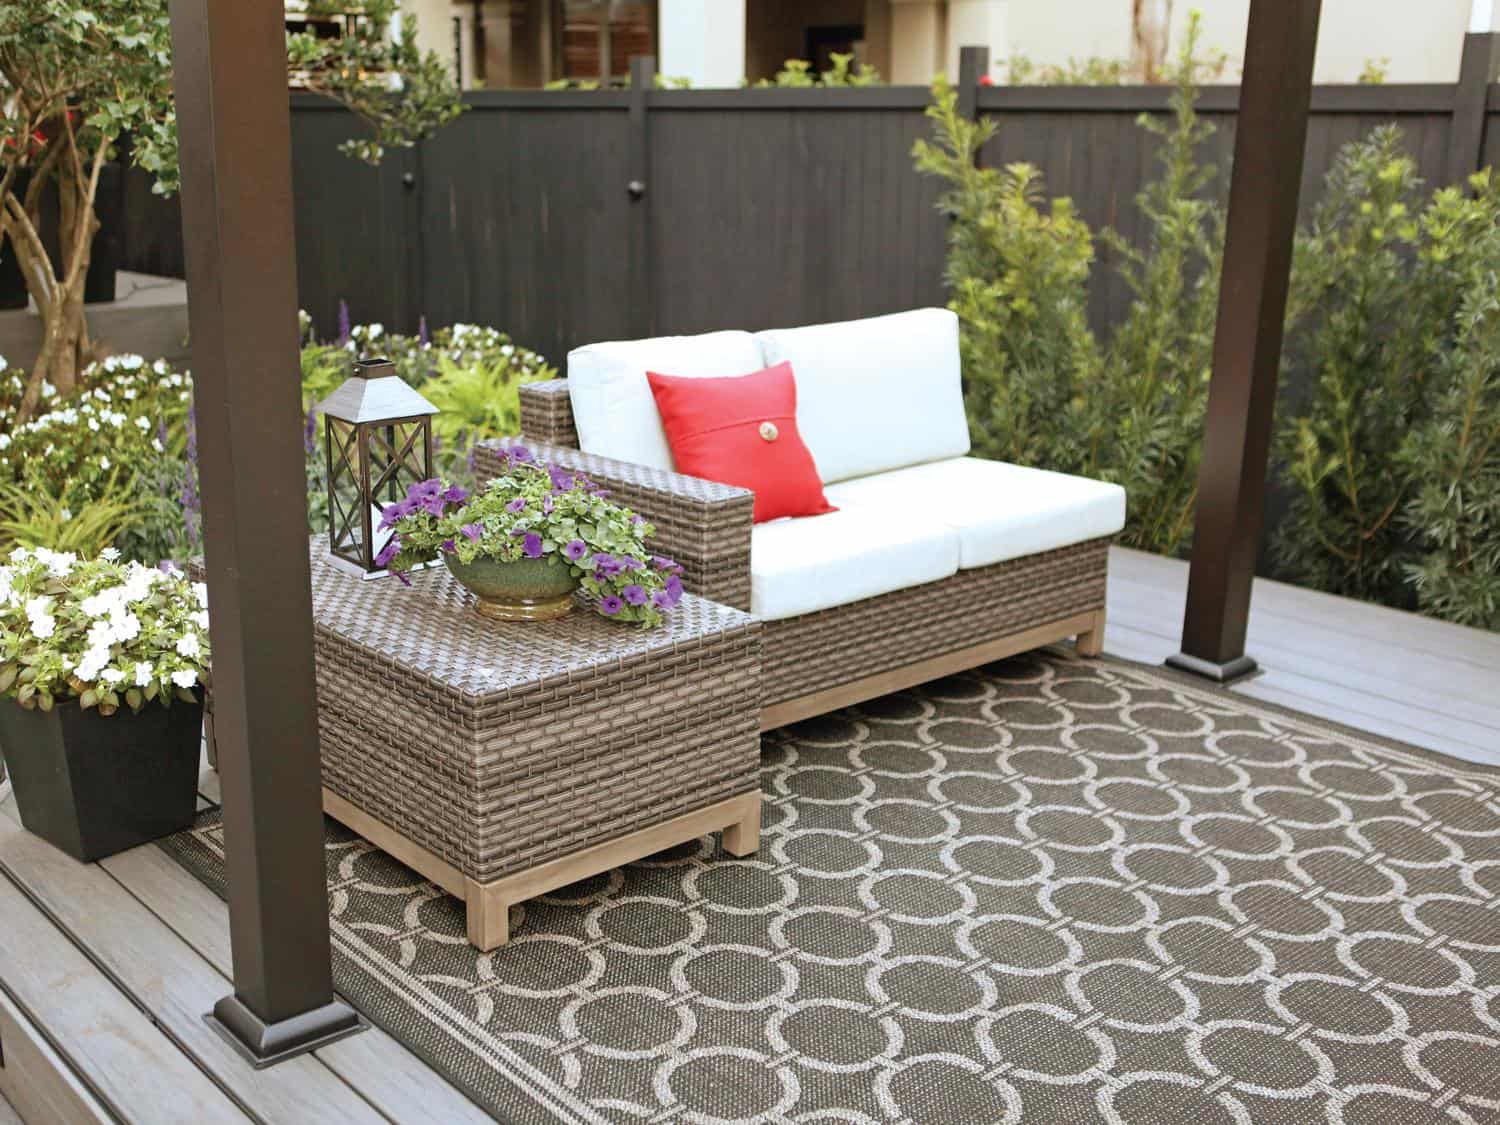 10 Ways to Make the Most out of a Small Outdoor Space